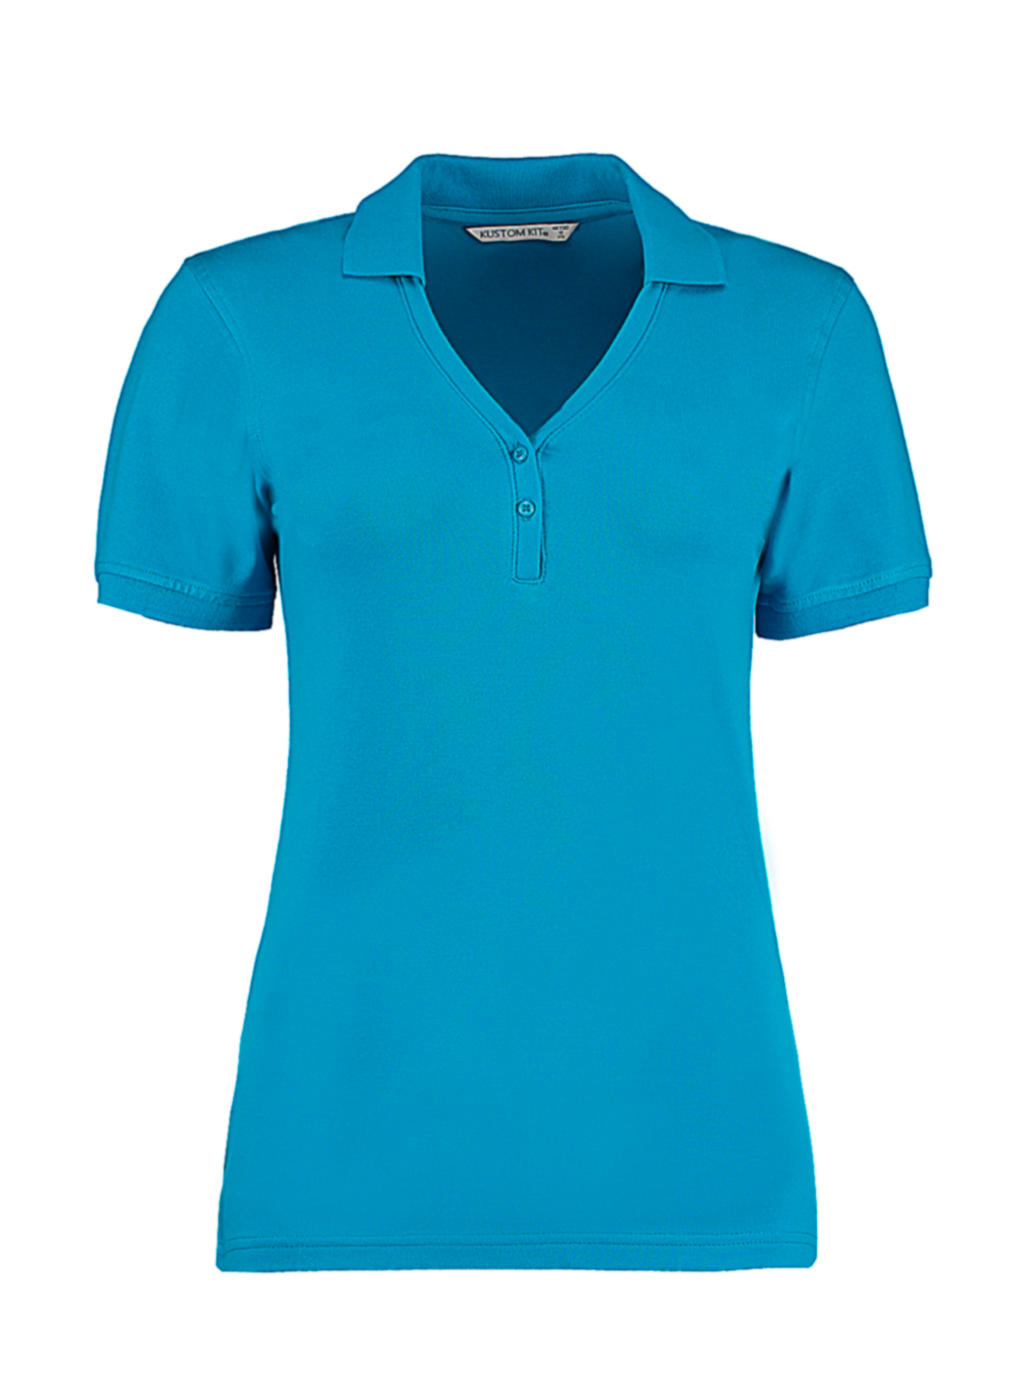  Womens Regular Fit Comfortec? V Neck Polo in Farbe Turquoise